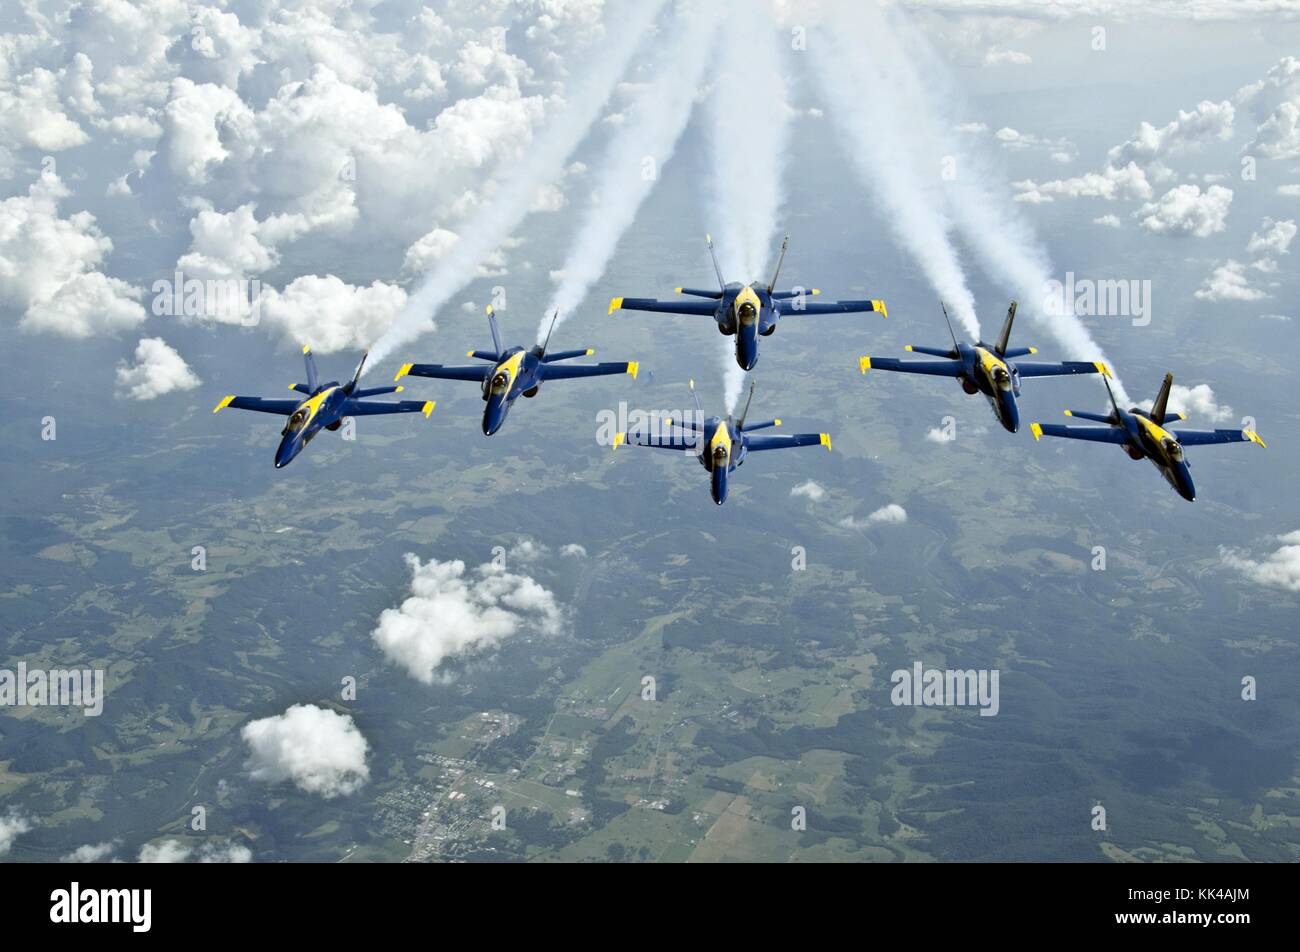 The US Navy Flight Demonstration Squadron, the Blue Angels, fly in the Delta formation over Sugarloaf, SC, Sugarloaf, South Carolina, 2012. Image courtesy Mass Communication Specialist 1st Class Rachel McMarr/US Navy. Stock Photo